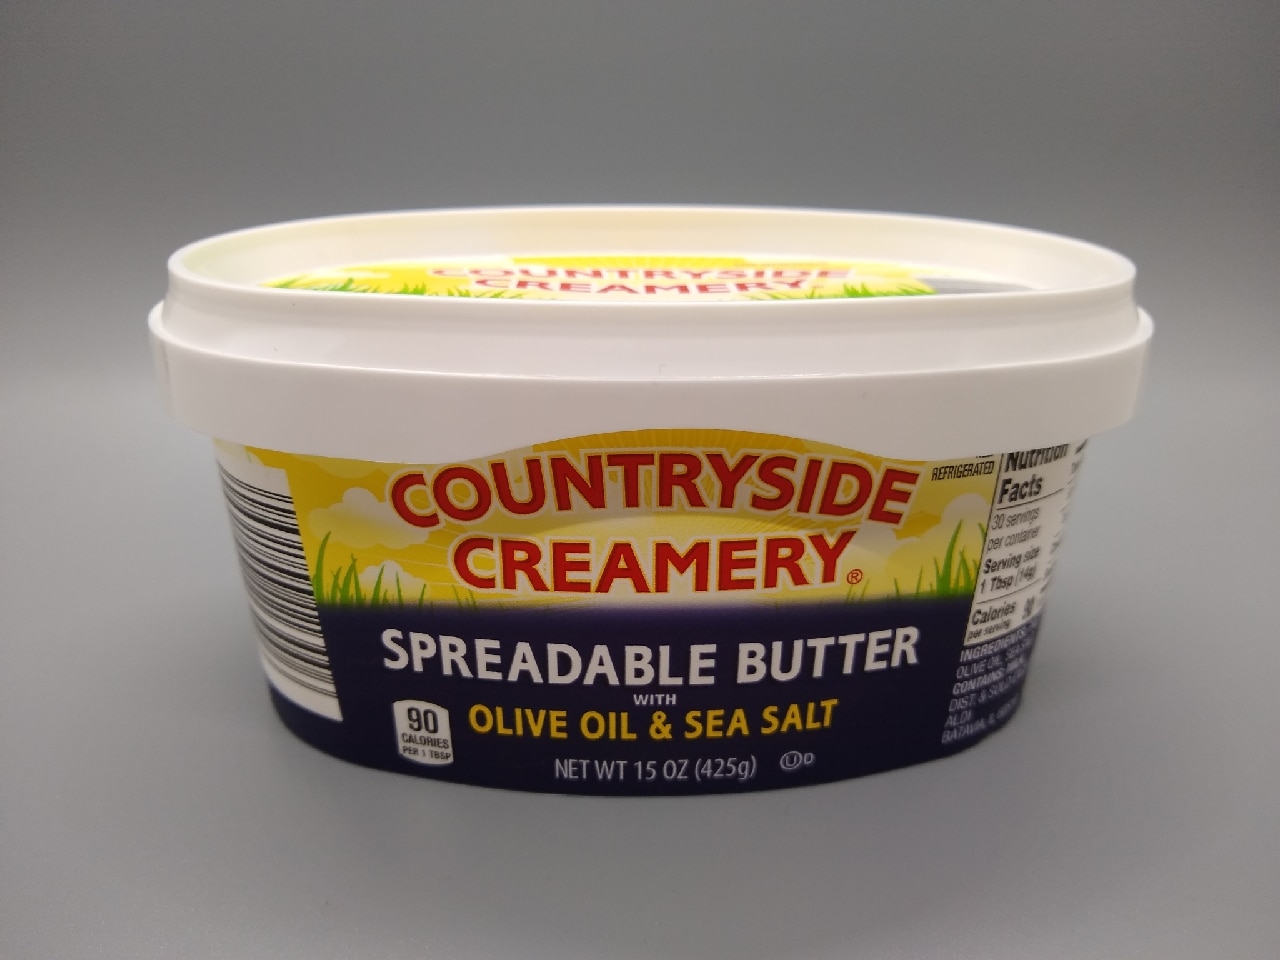 Countryside Creamery Spreadable Butter